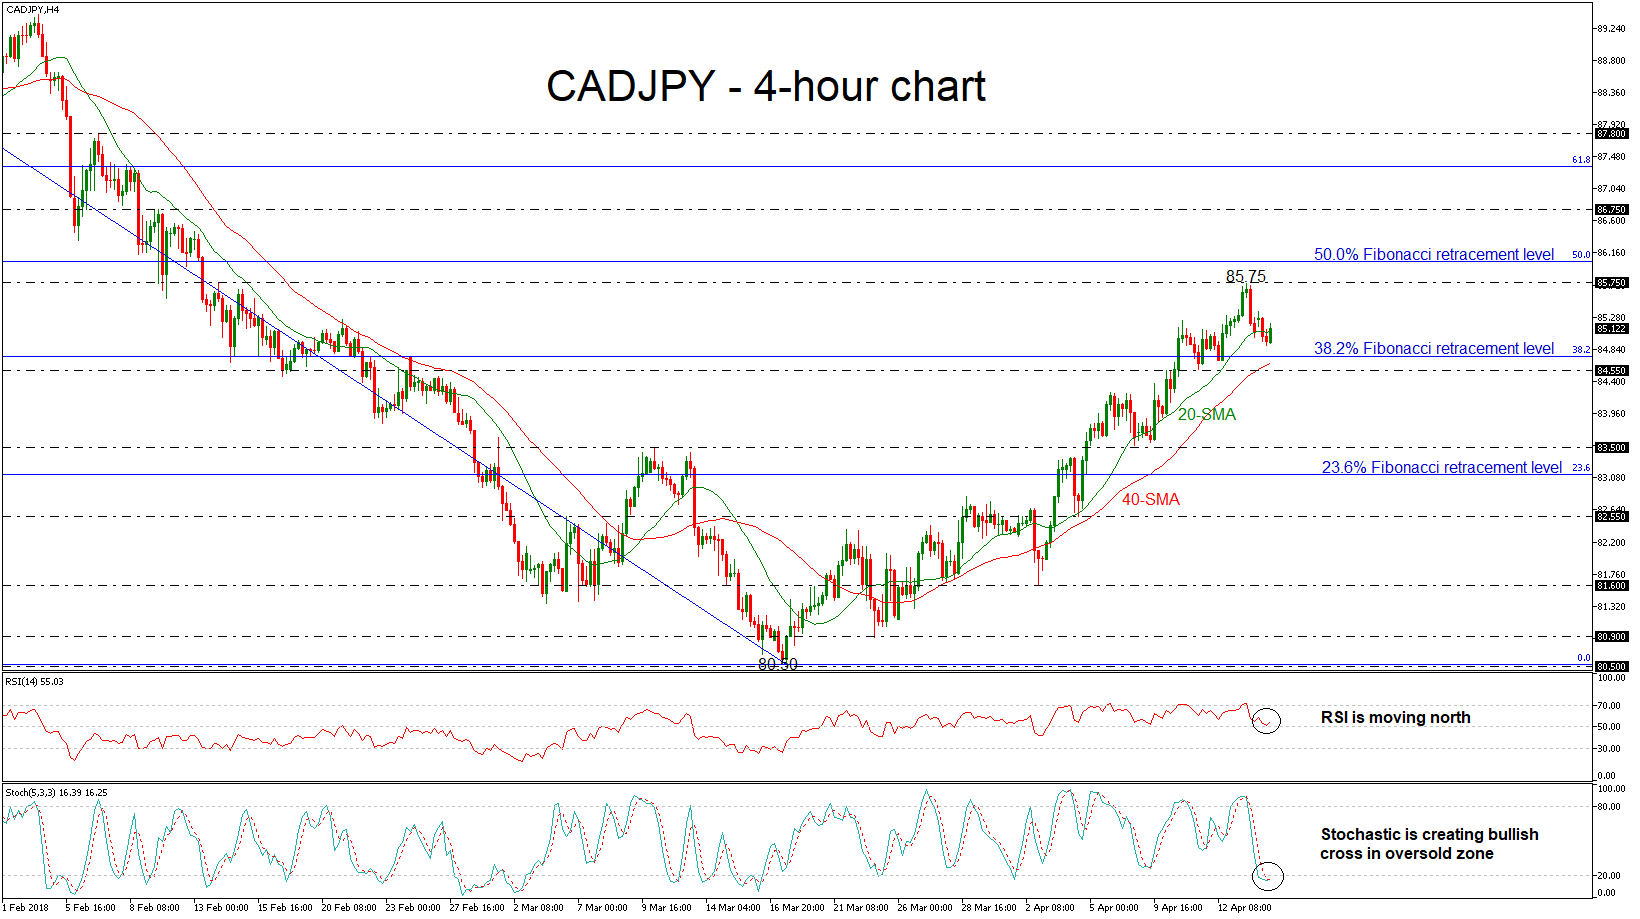 Technical Analysis Cadjpy Maintains Bullish Bias After Rebound On - 